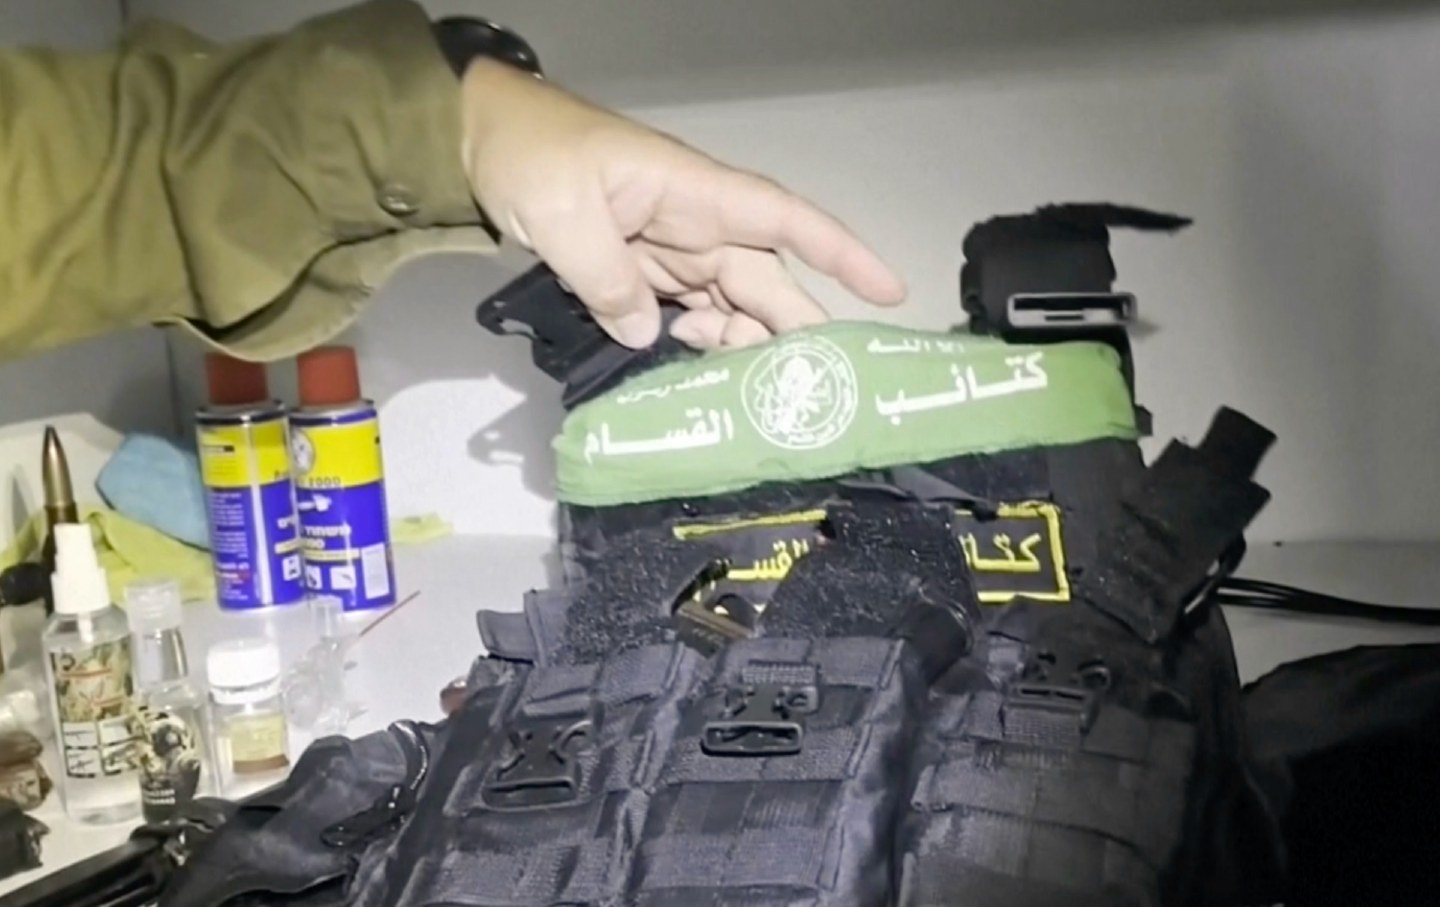 Wearing a green shirt and holding a bulletproof vest with the Hamas symbol in one hand